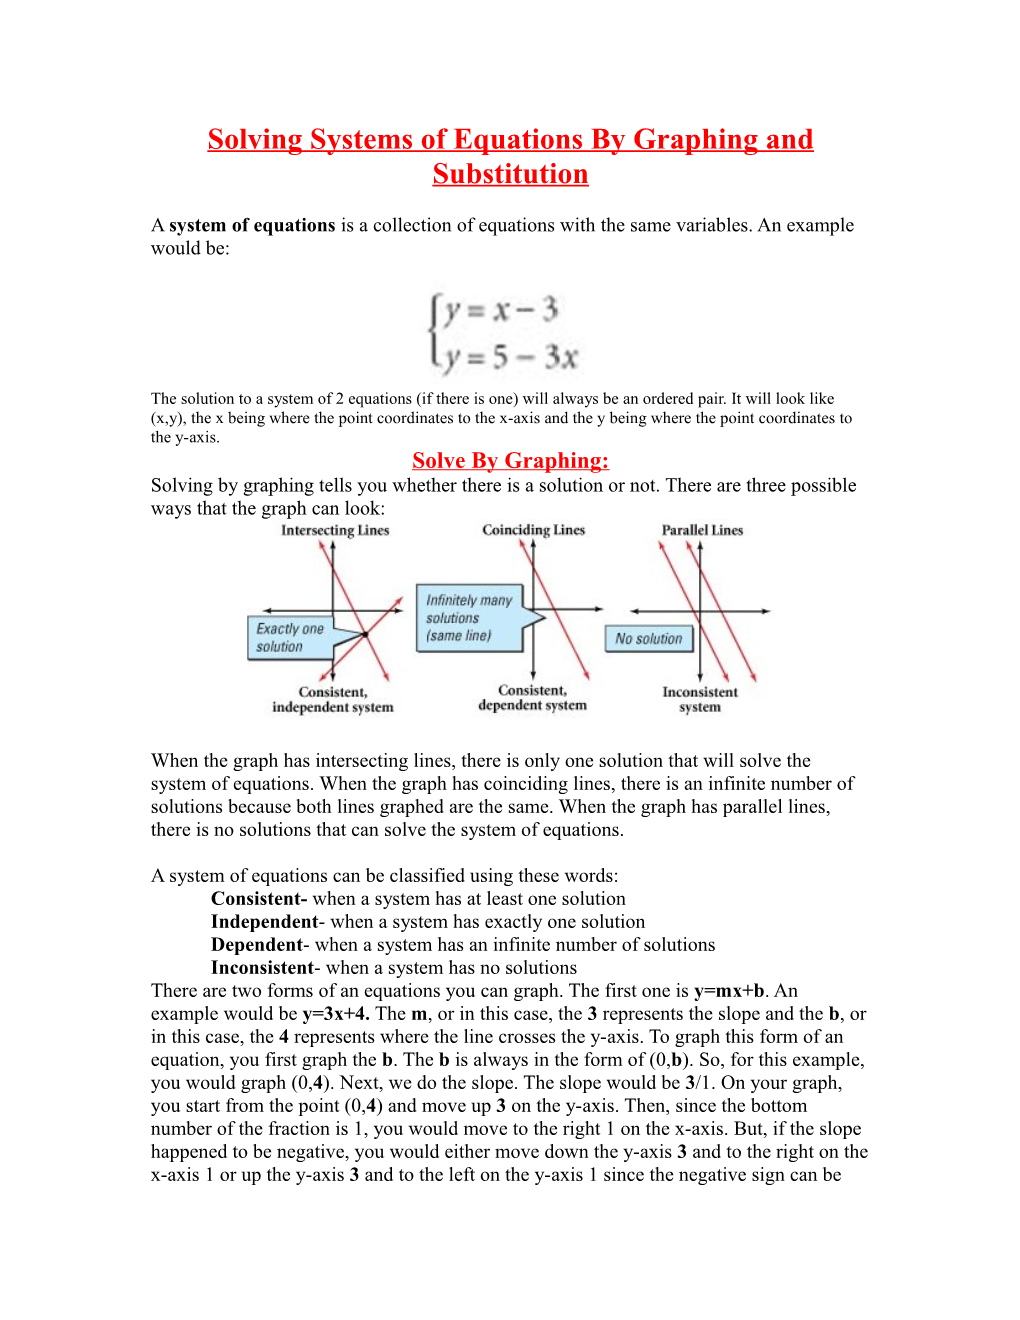 Solving Systems of Equations by Graphing and Substitution